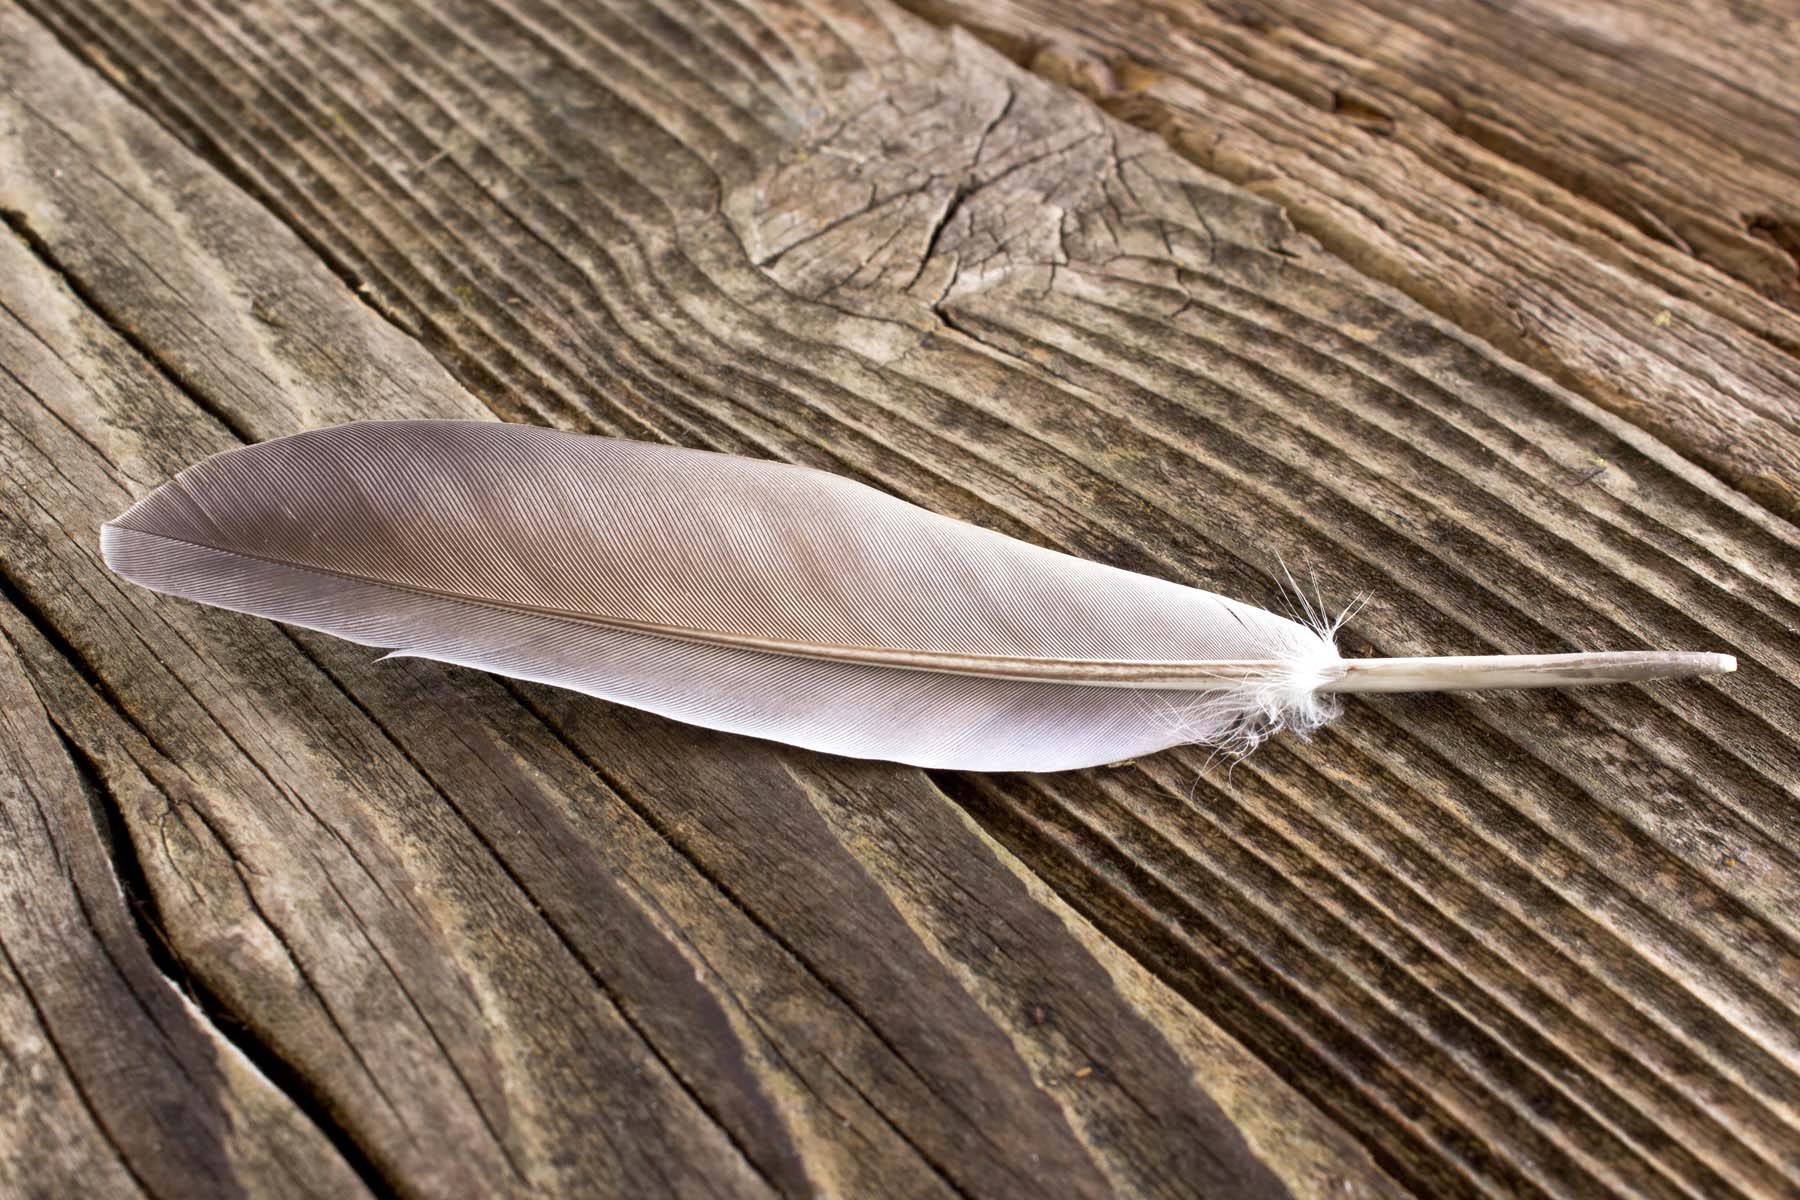 Has 'light as a feather, stiff as a board' ever worked? | HowStuffWorks